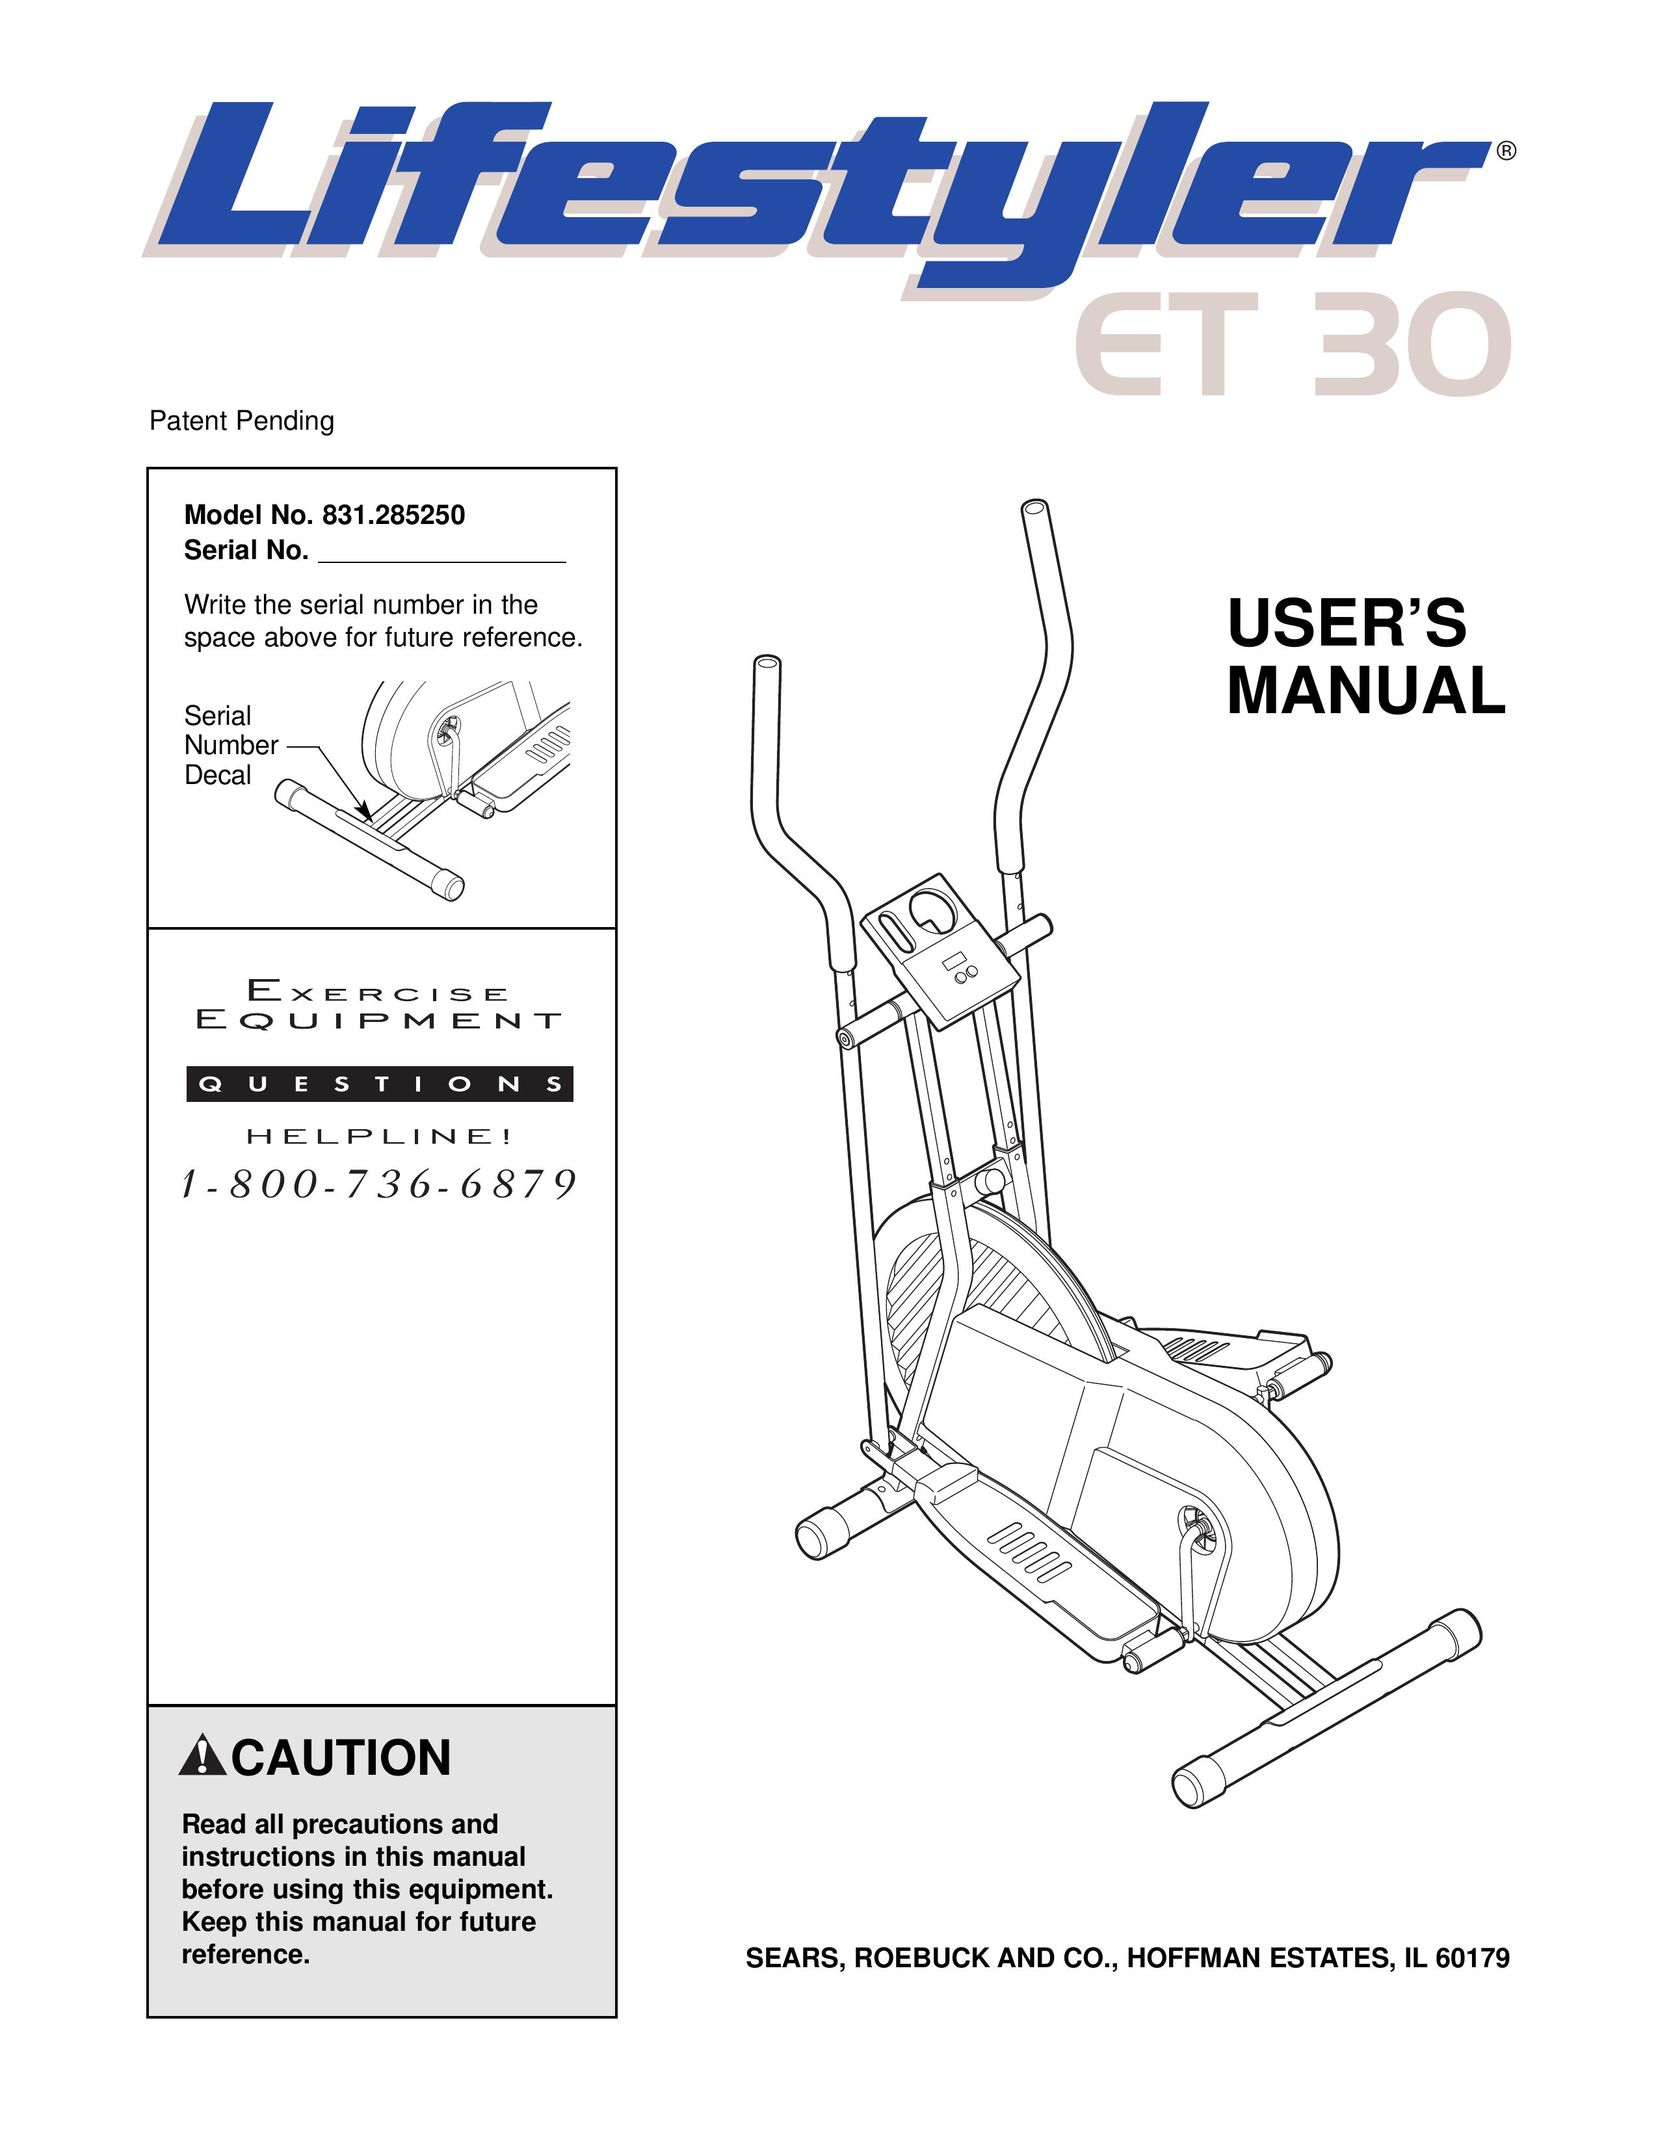 Sears ET 30 Home Gym User Manual